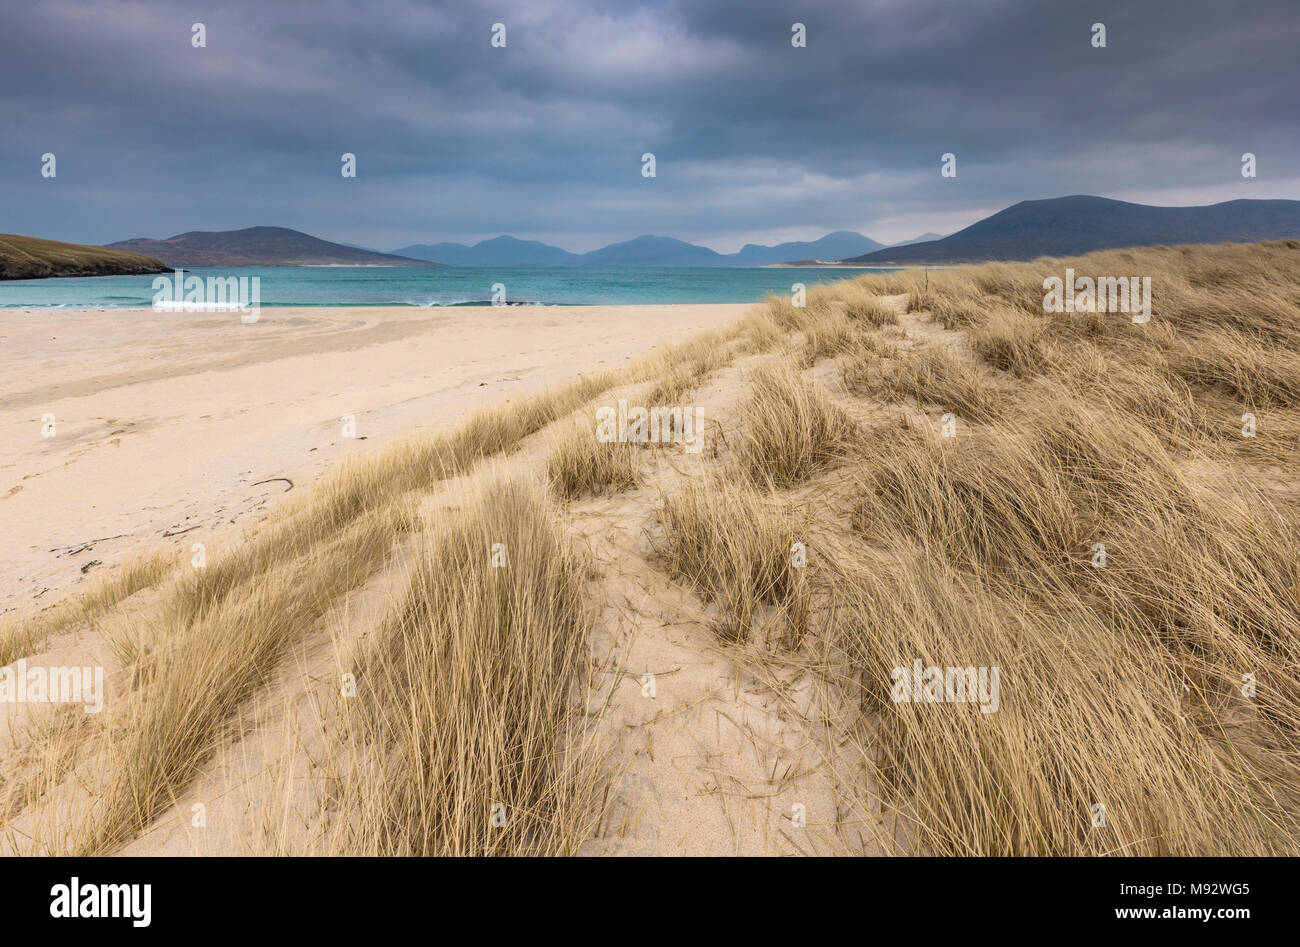 Seilebost beach on the Isle of Harris in the Outer Hebrides. Stock Photo